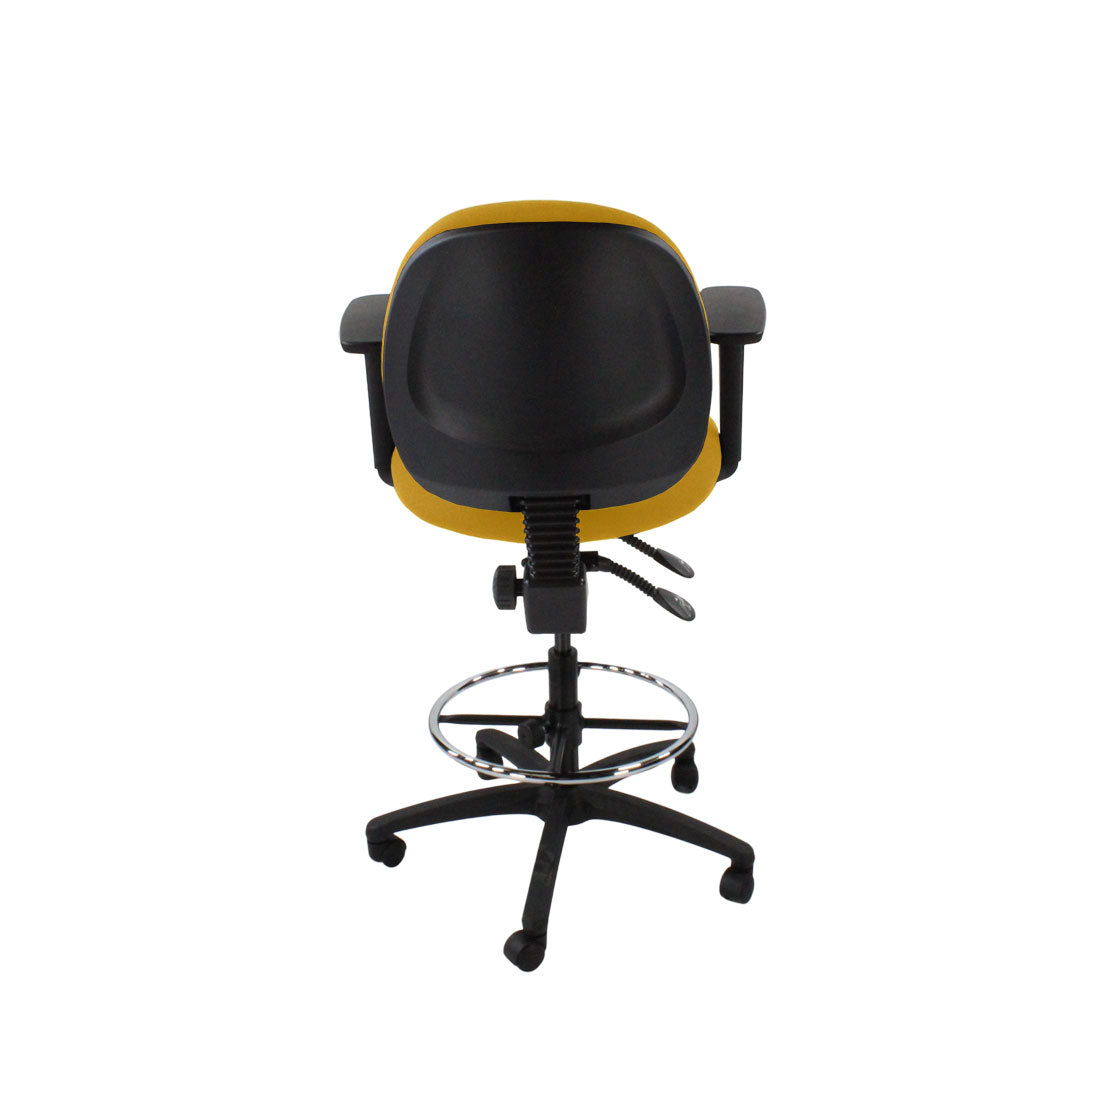 TOC: Scoop Draughtsman Chair in Yellow Fabric - Refurbished